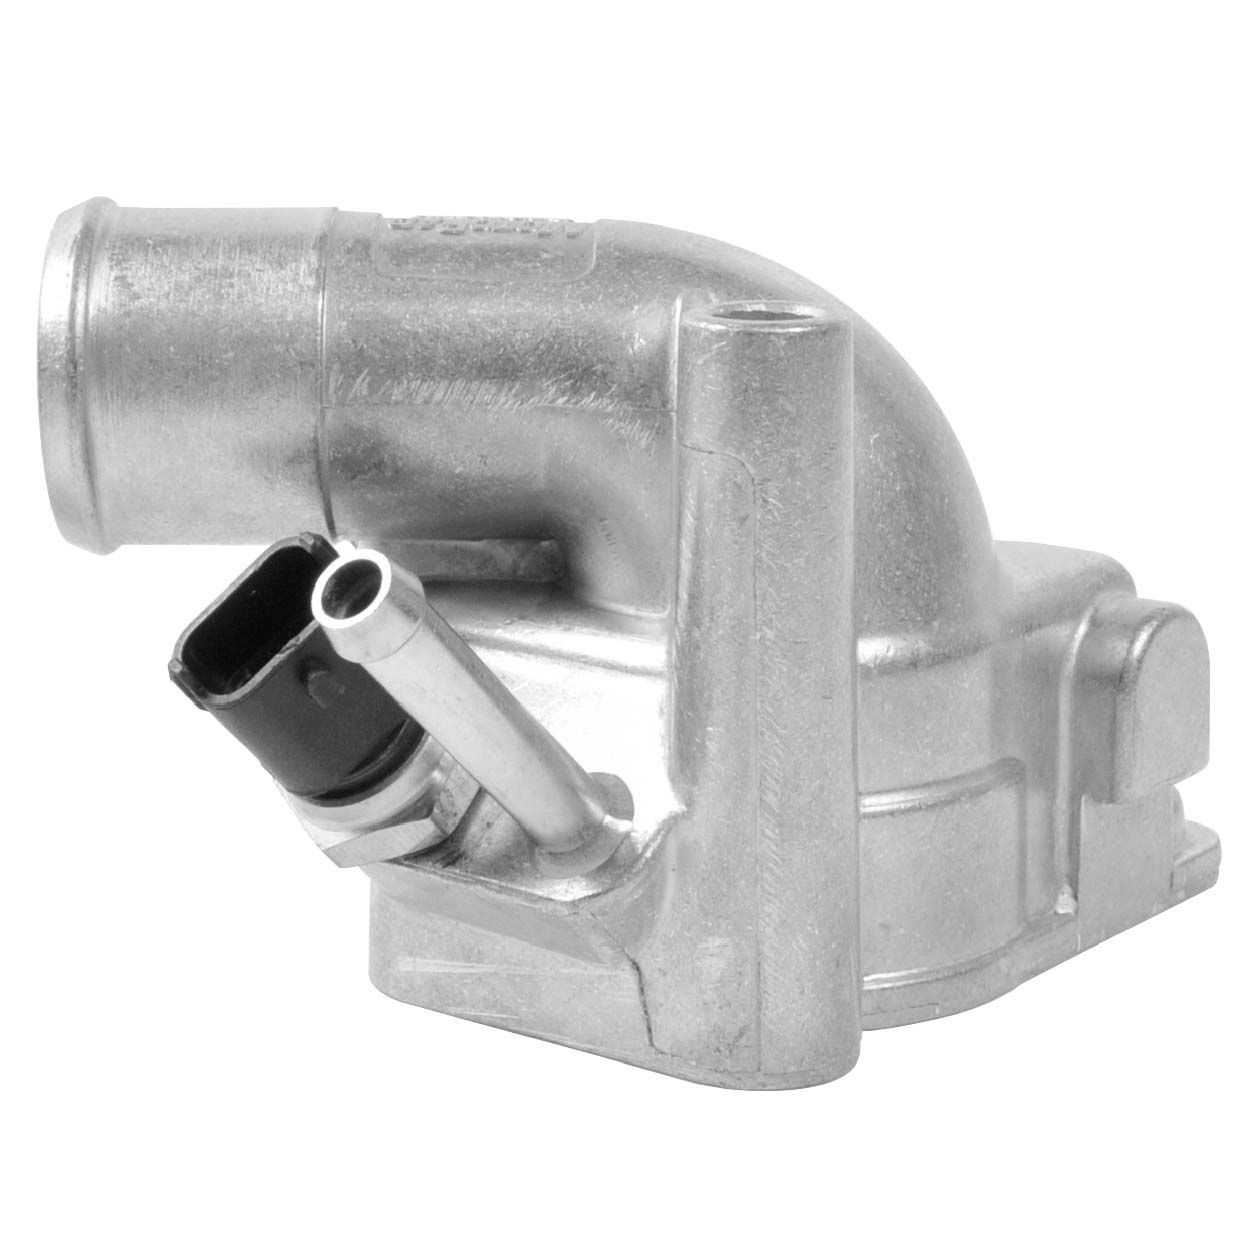 GATES TH24392G1 Engine thermostat Opening Temperature: 92°C, with gaskets/seals, with housing